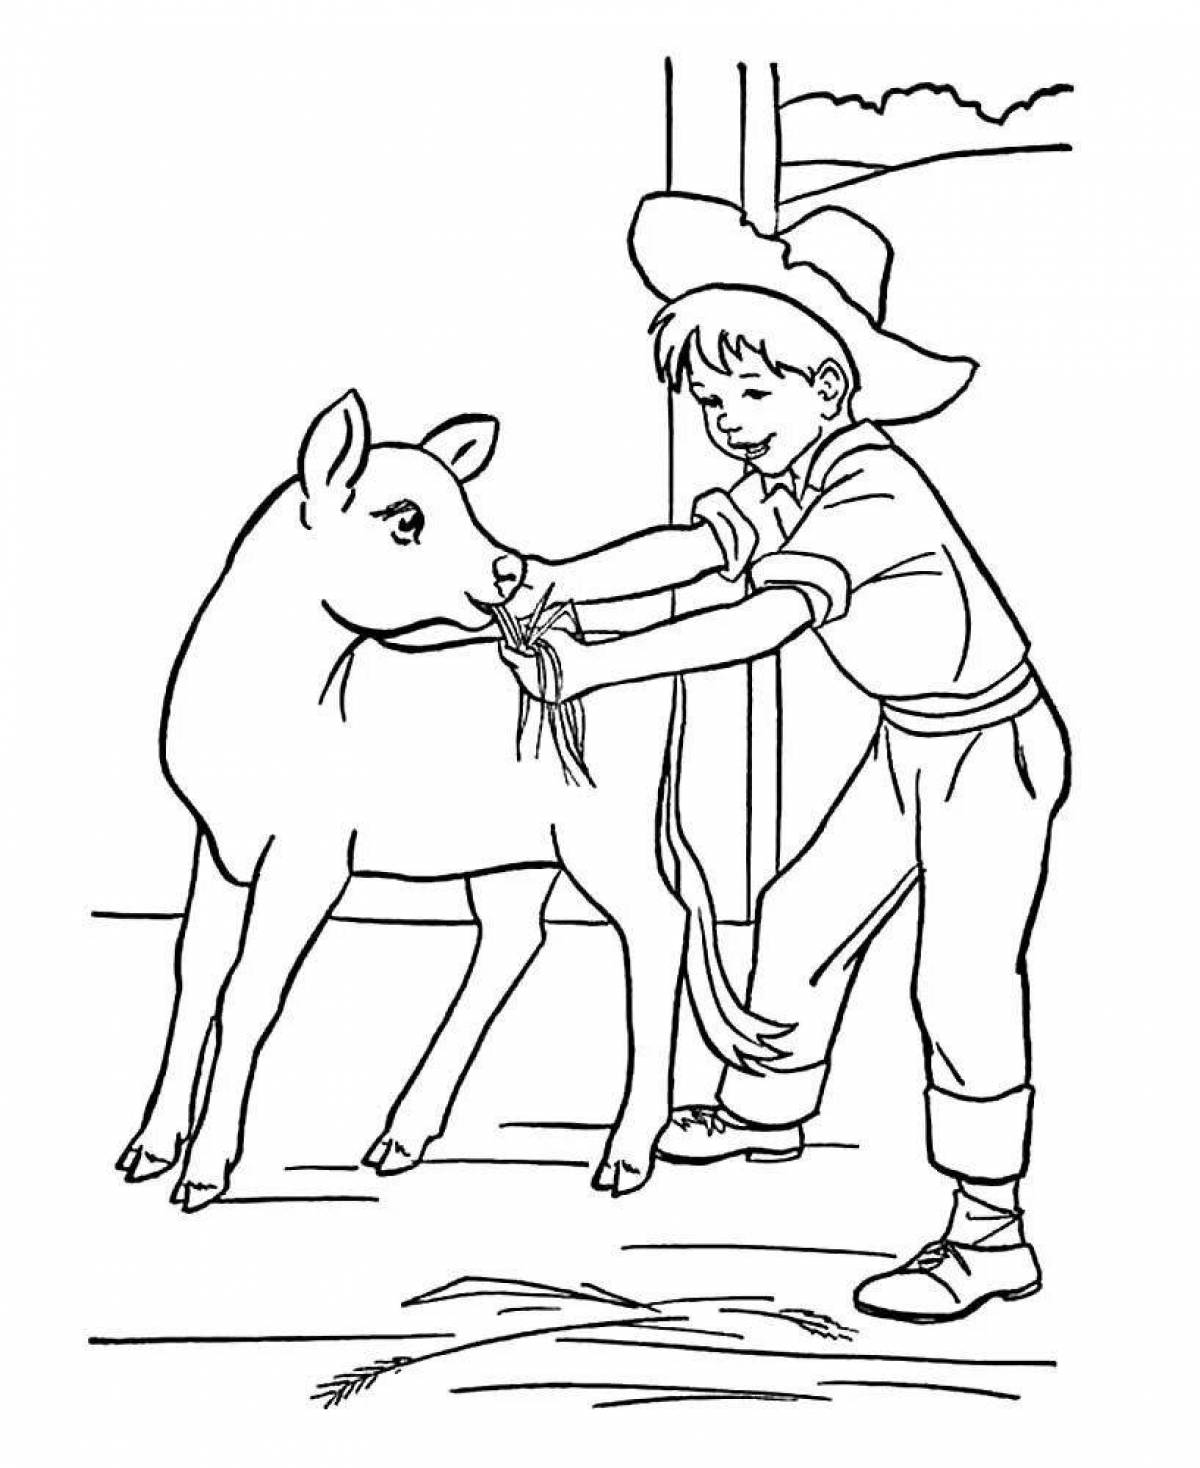 Animated farmer coloring page for kids